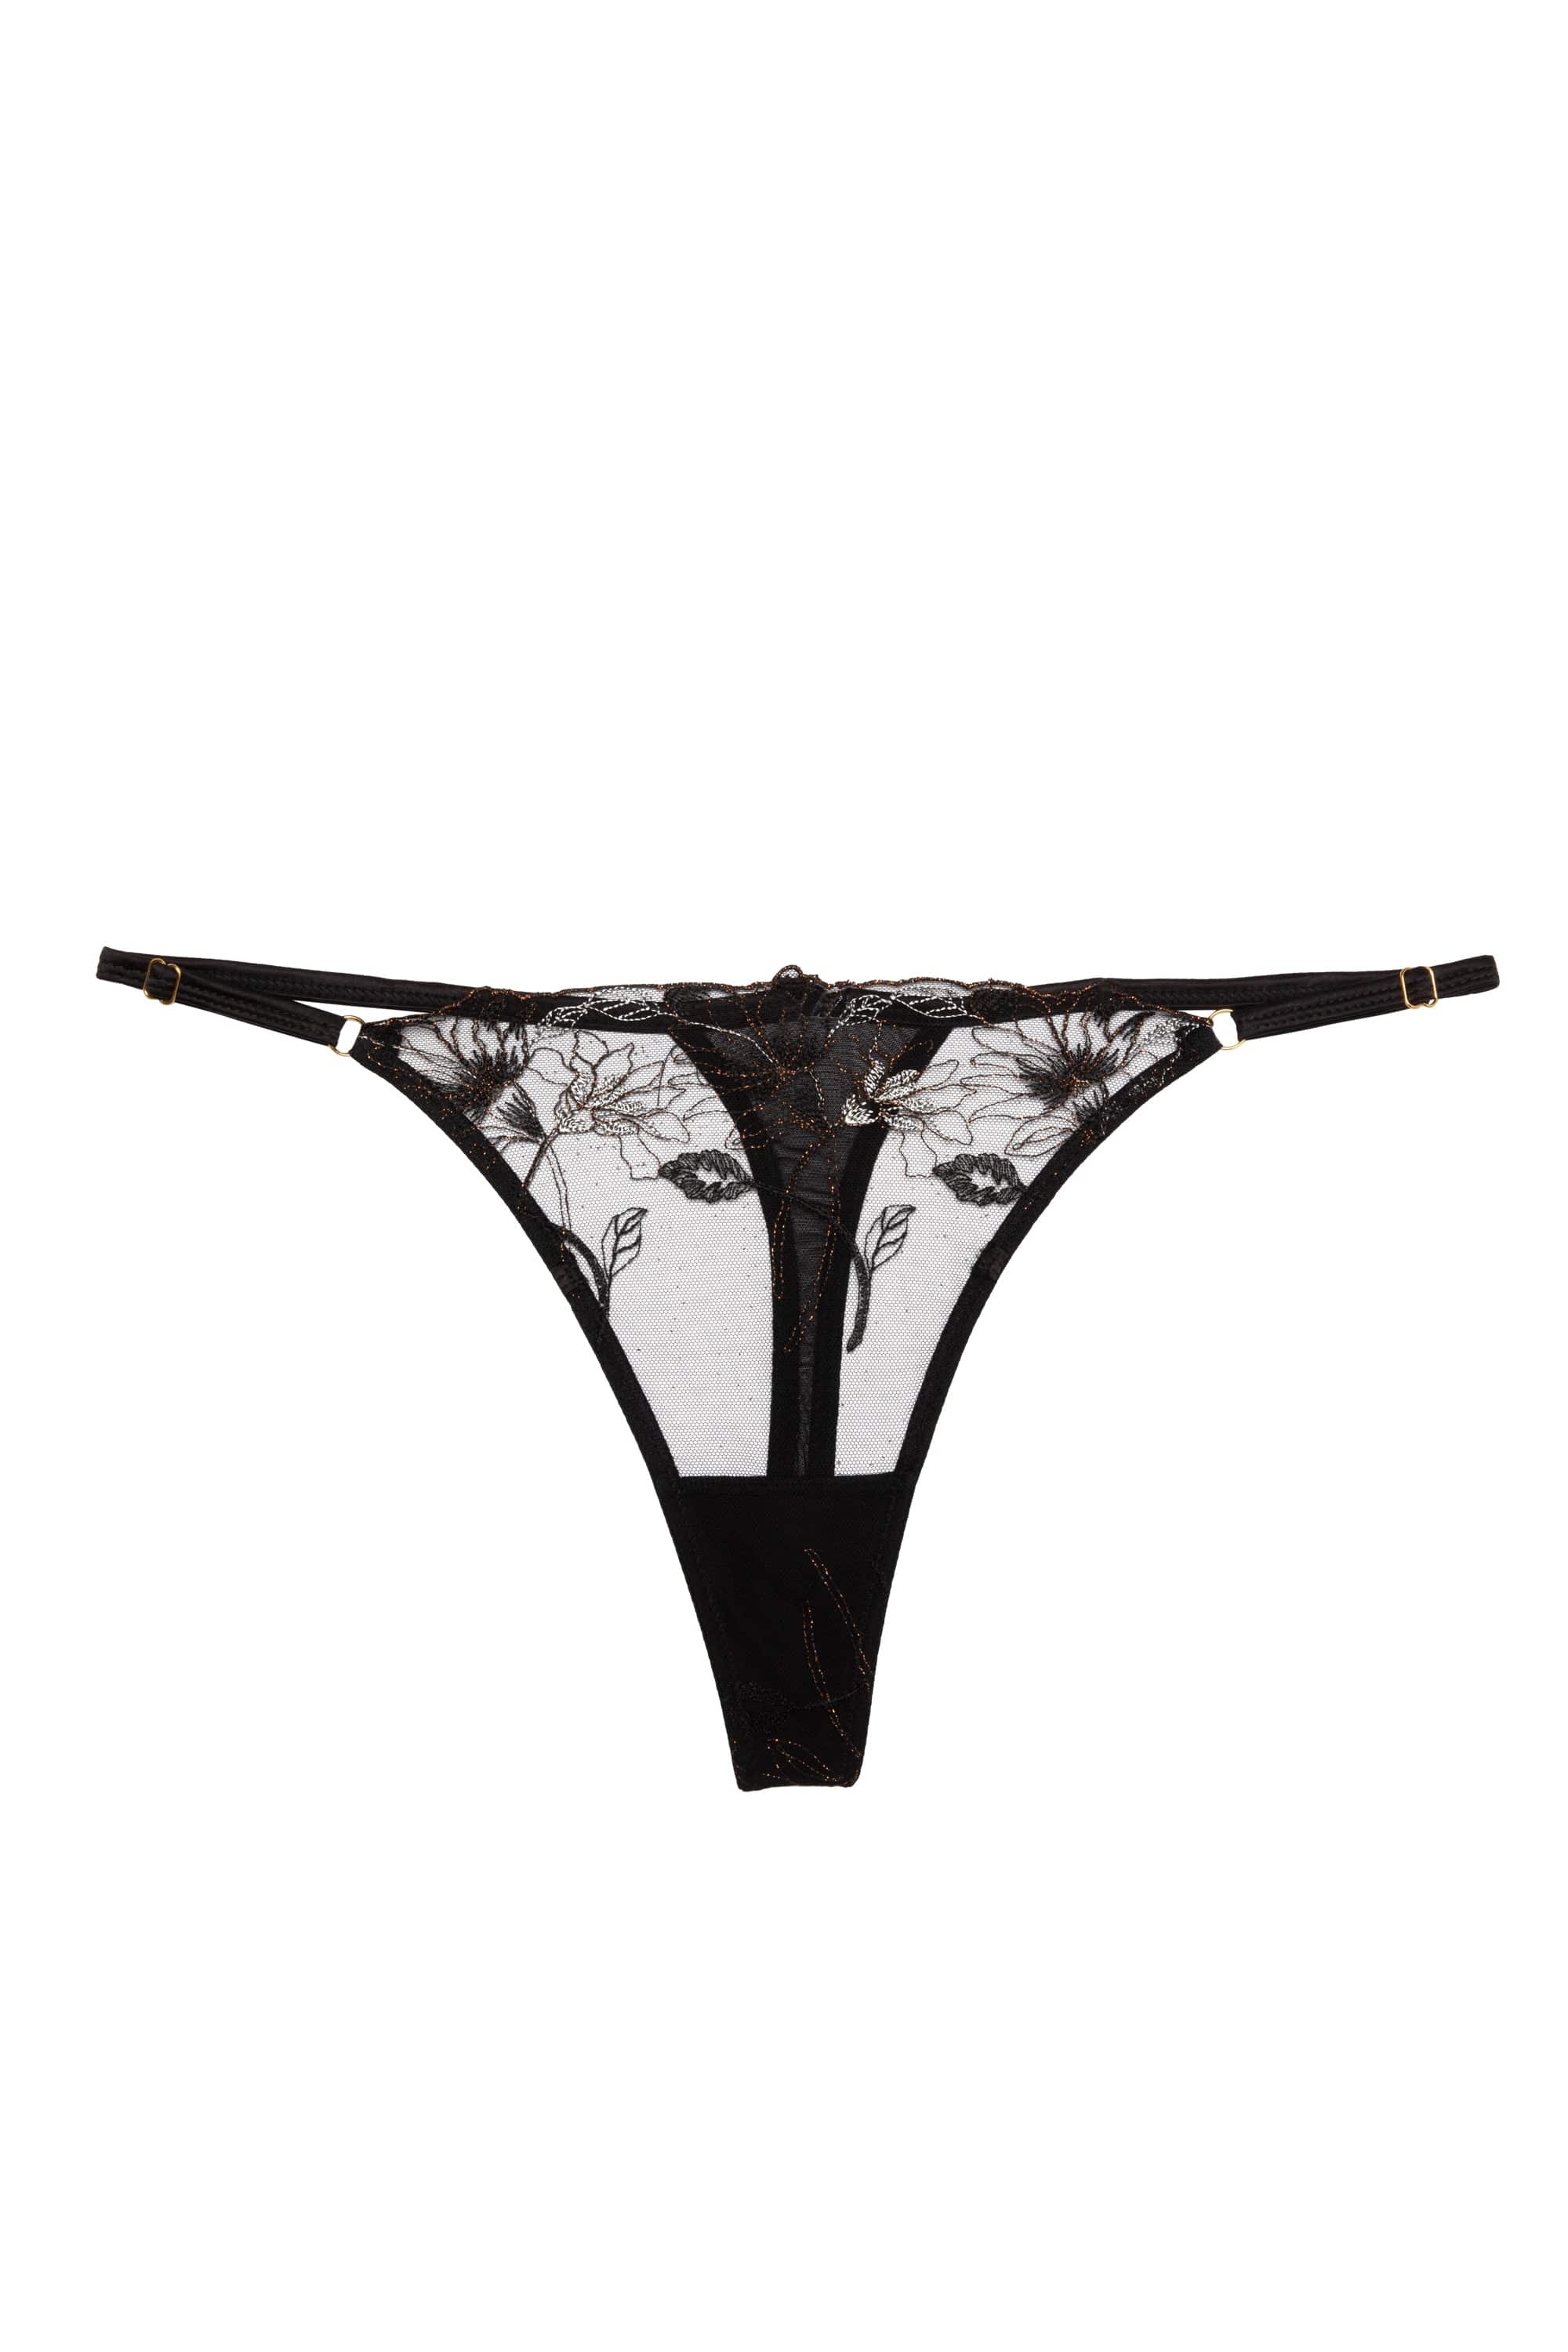 Aria Black and Gold Lace Strap Thong